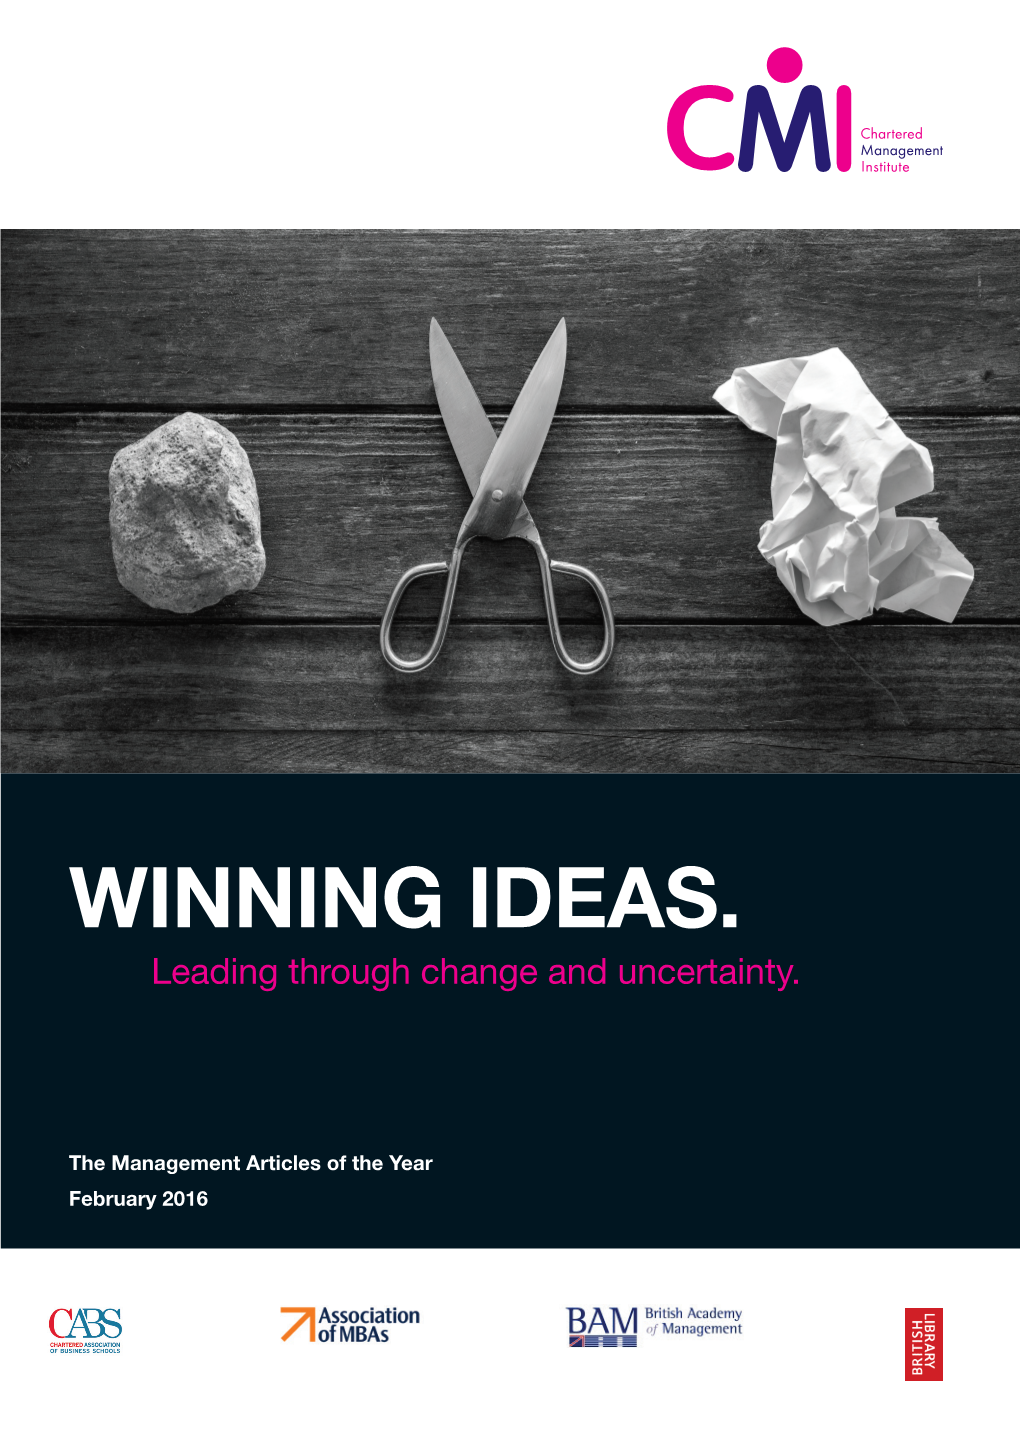 WINNING IDEAS. Leading Through Change and Uncertainty